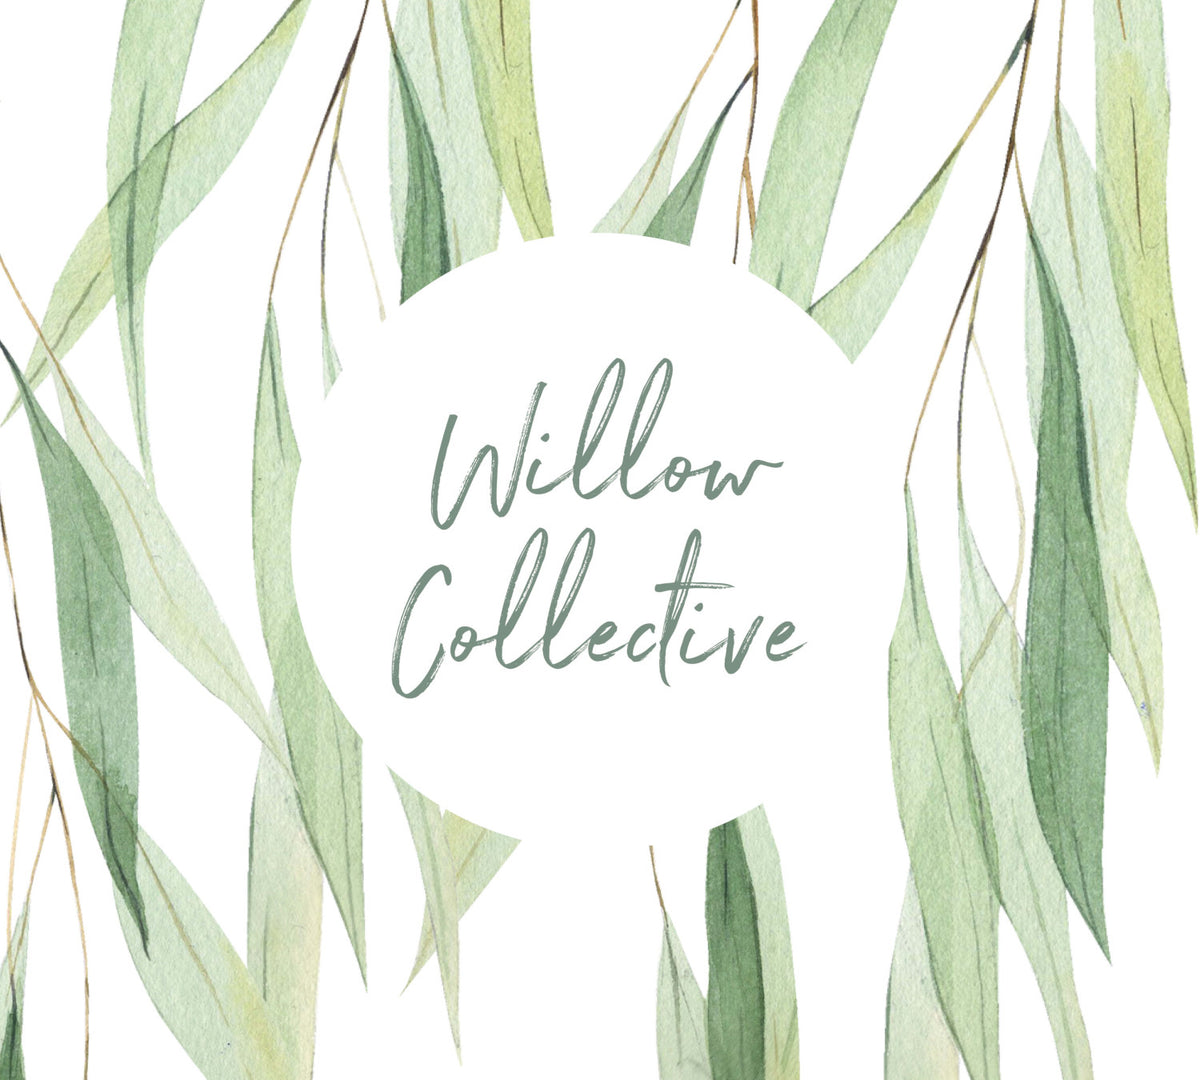 Willow Collective Mudgee